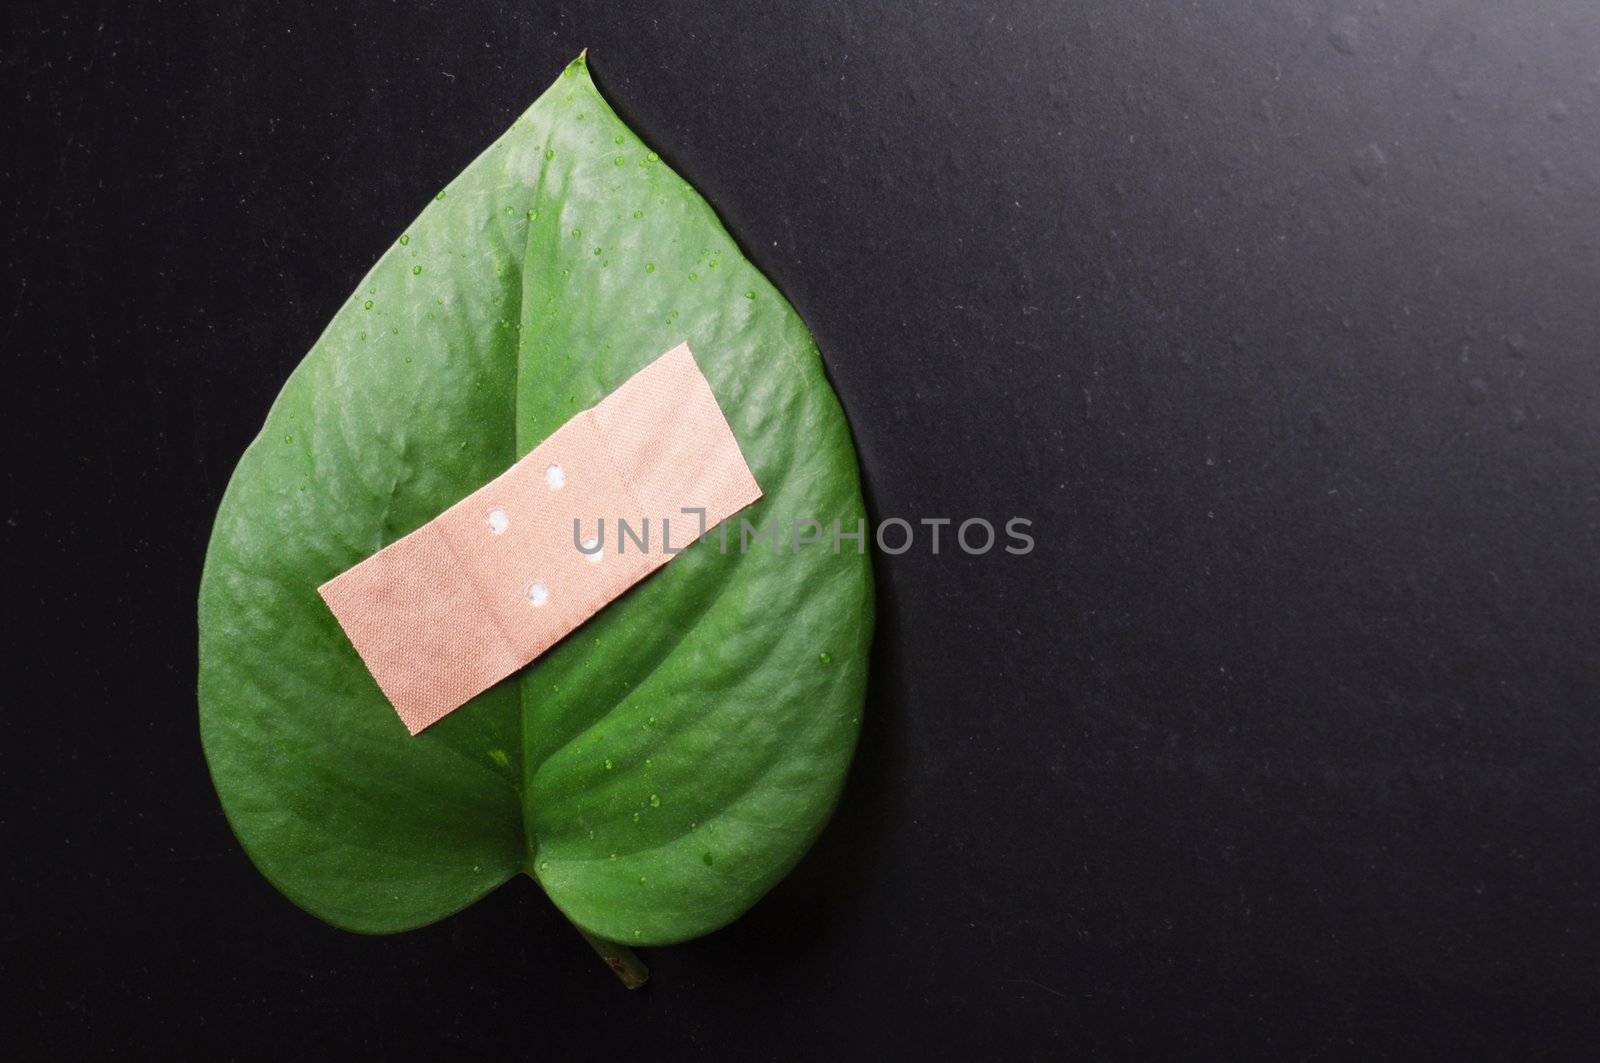 eco ecology or nature protection concept with leaf and band aid on black